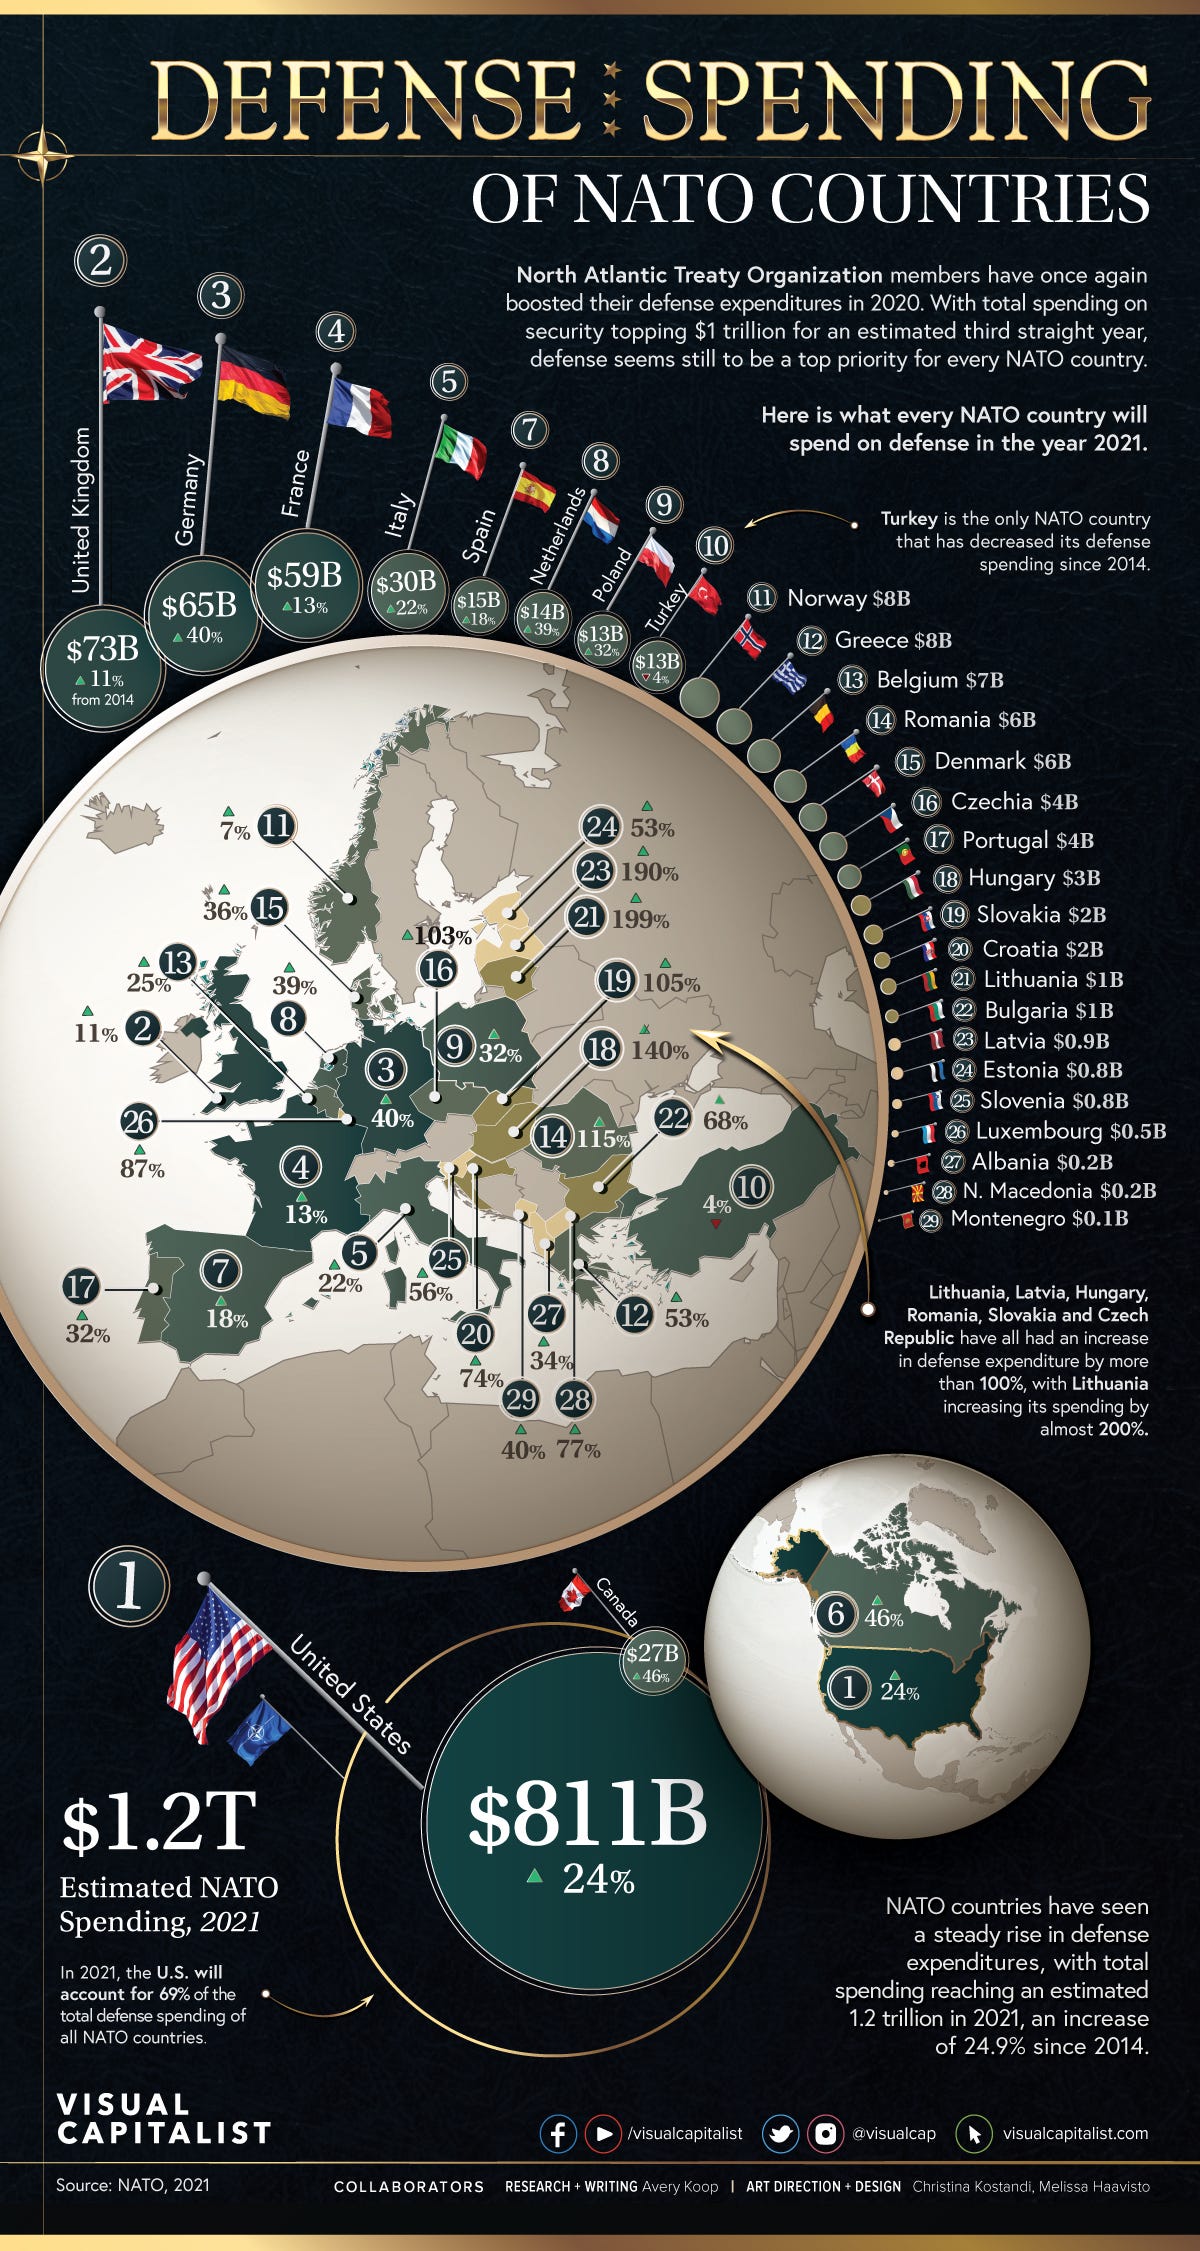 Visualizing NATO Defense Spending by Country